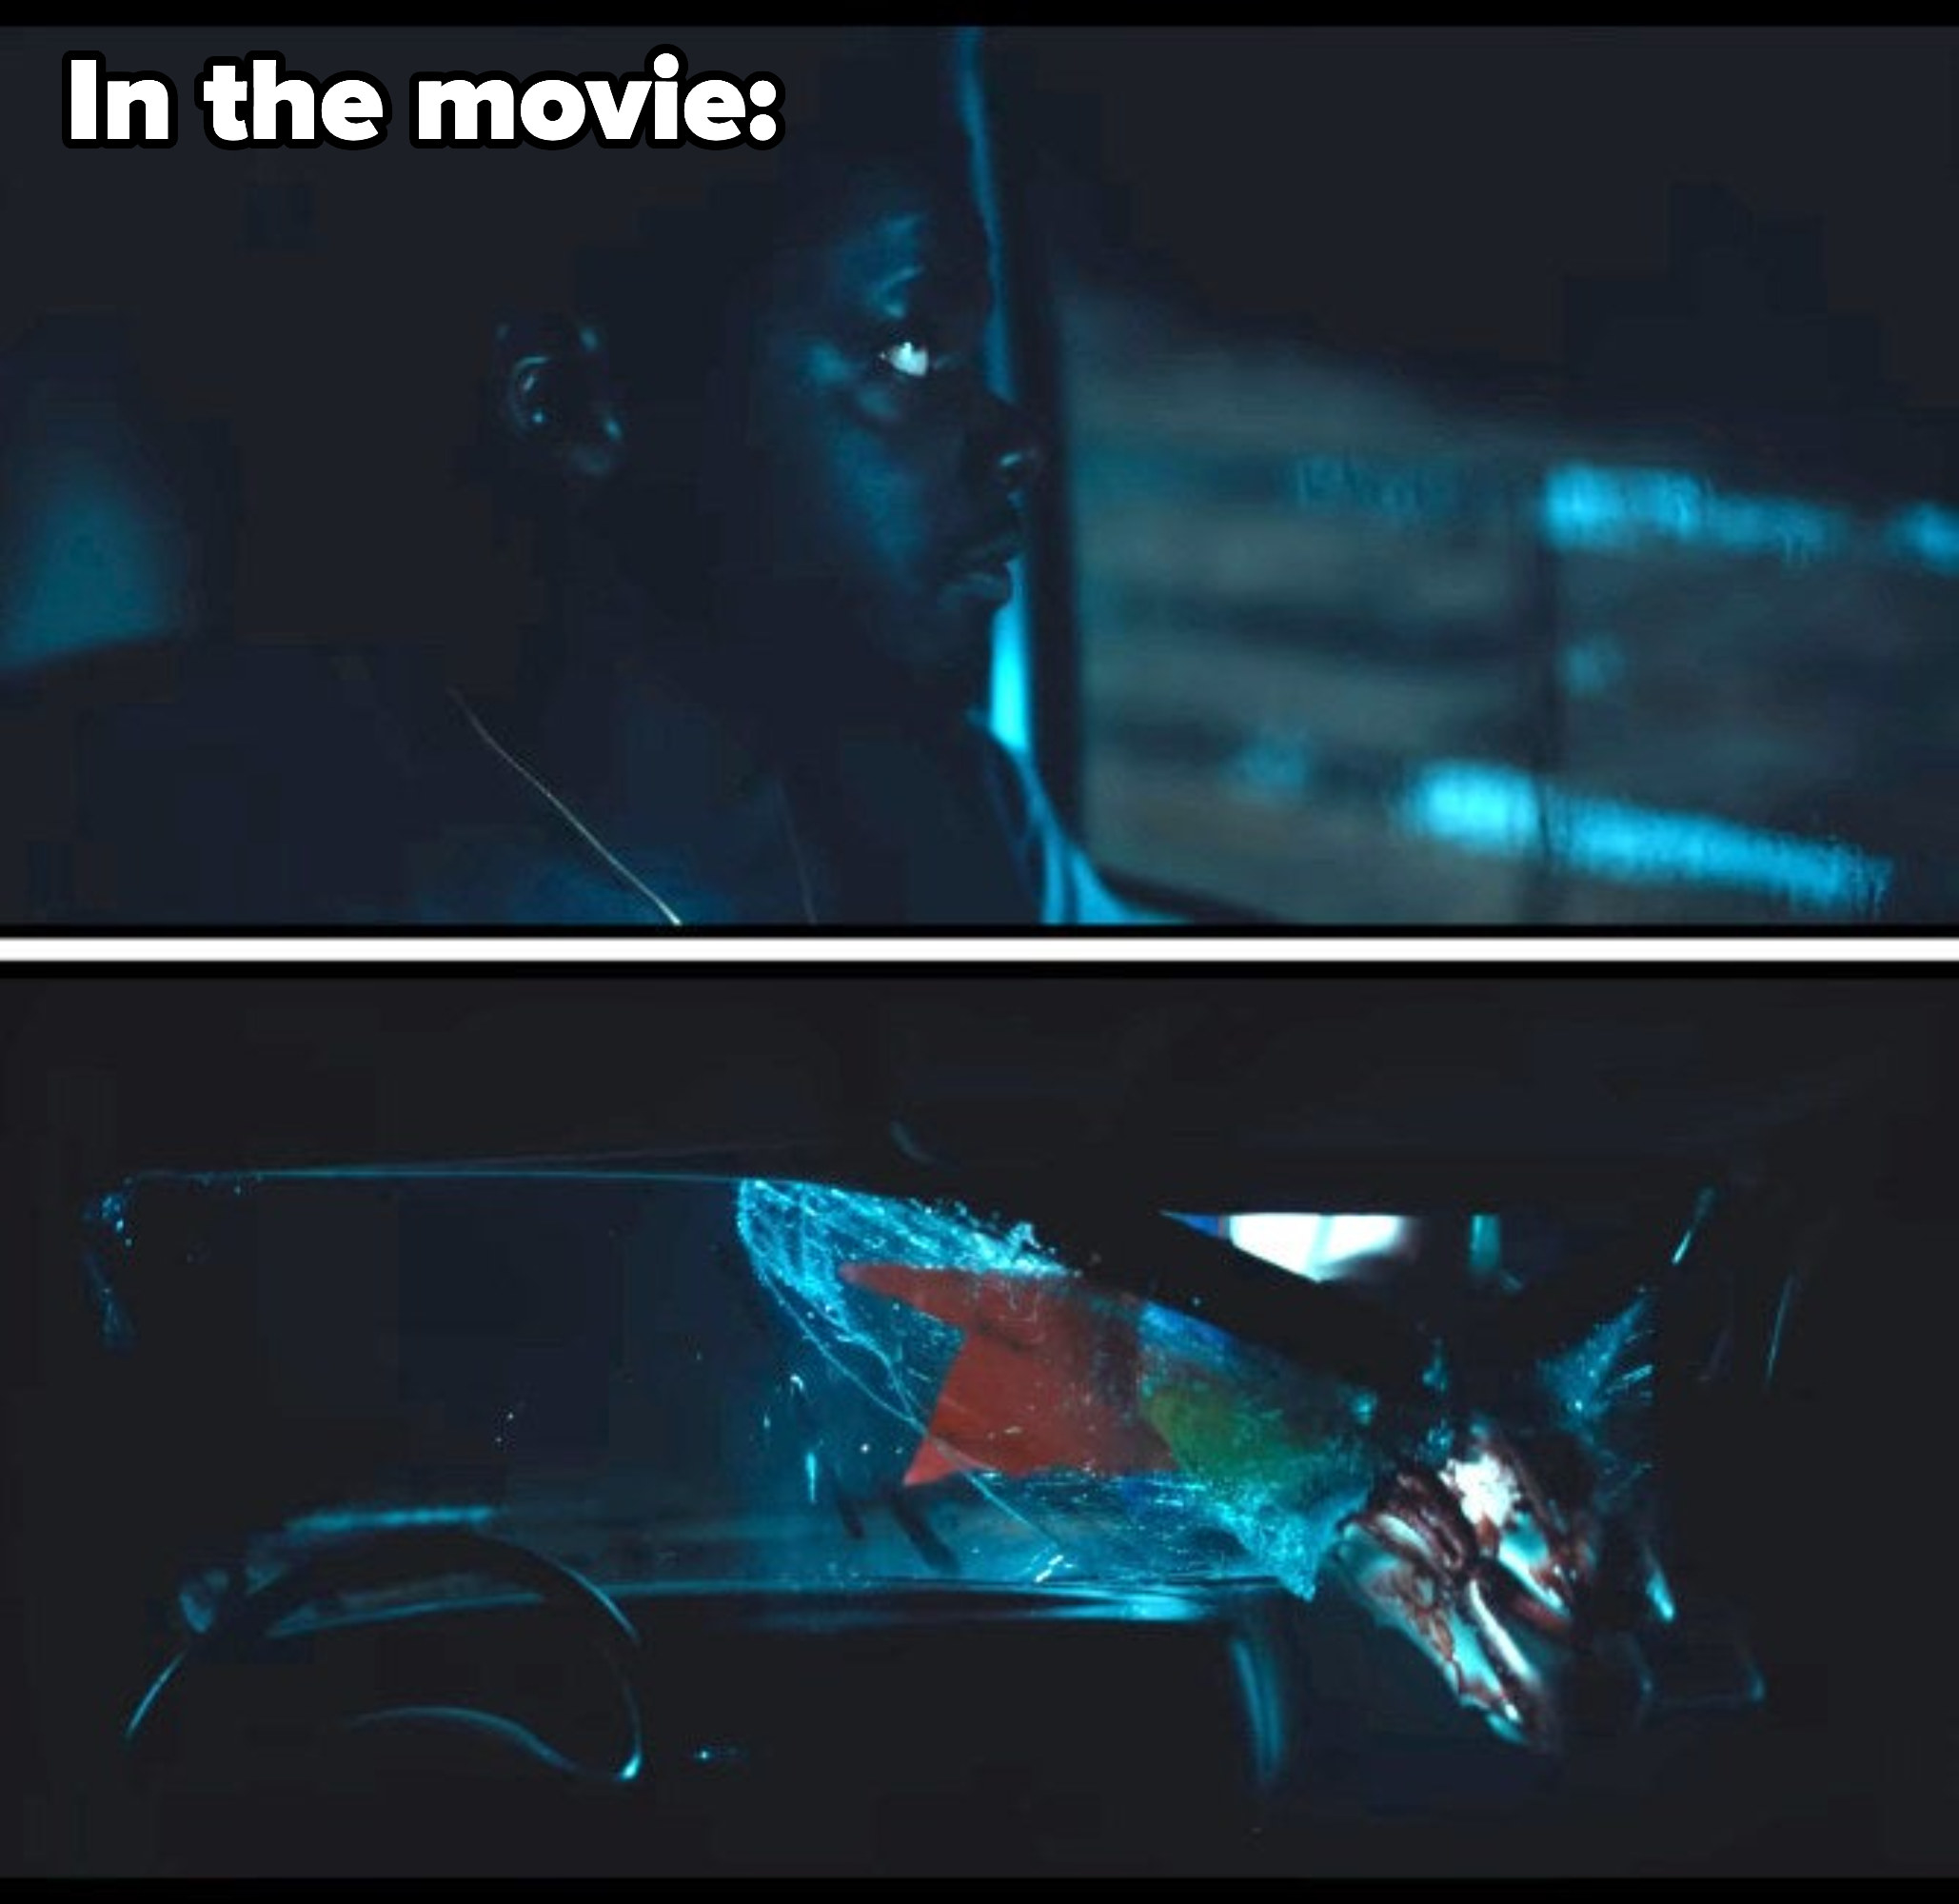 The decoy horse falling through the windshield in the movie